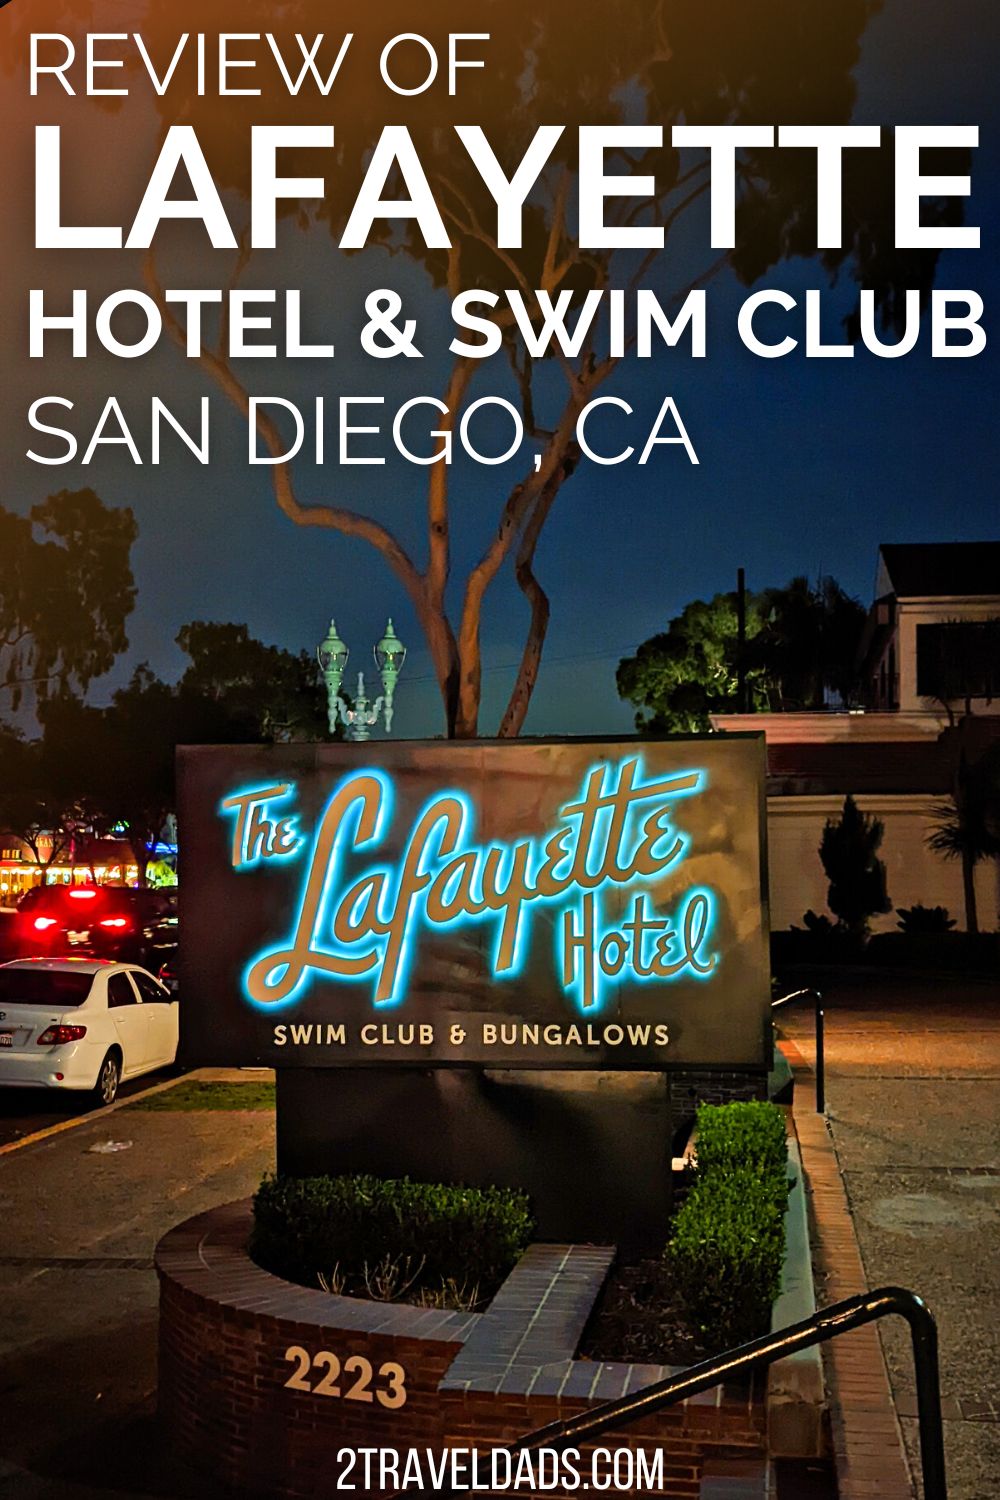 San Diego's Lafayette Hotel, Swim Club and Bungalows is a great vintage stay close to Balboa Park. See what to expect from this old Hollywood destination hotel, one of the most fun places in San Diego.